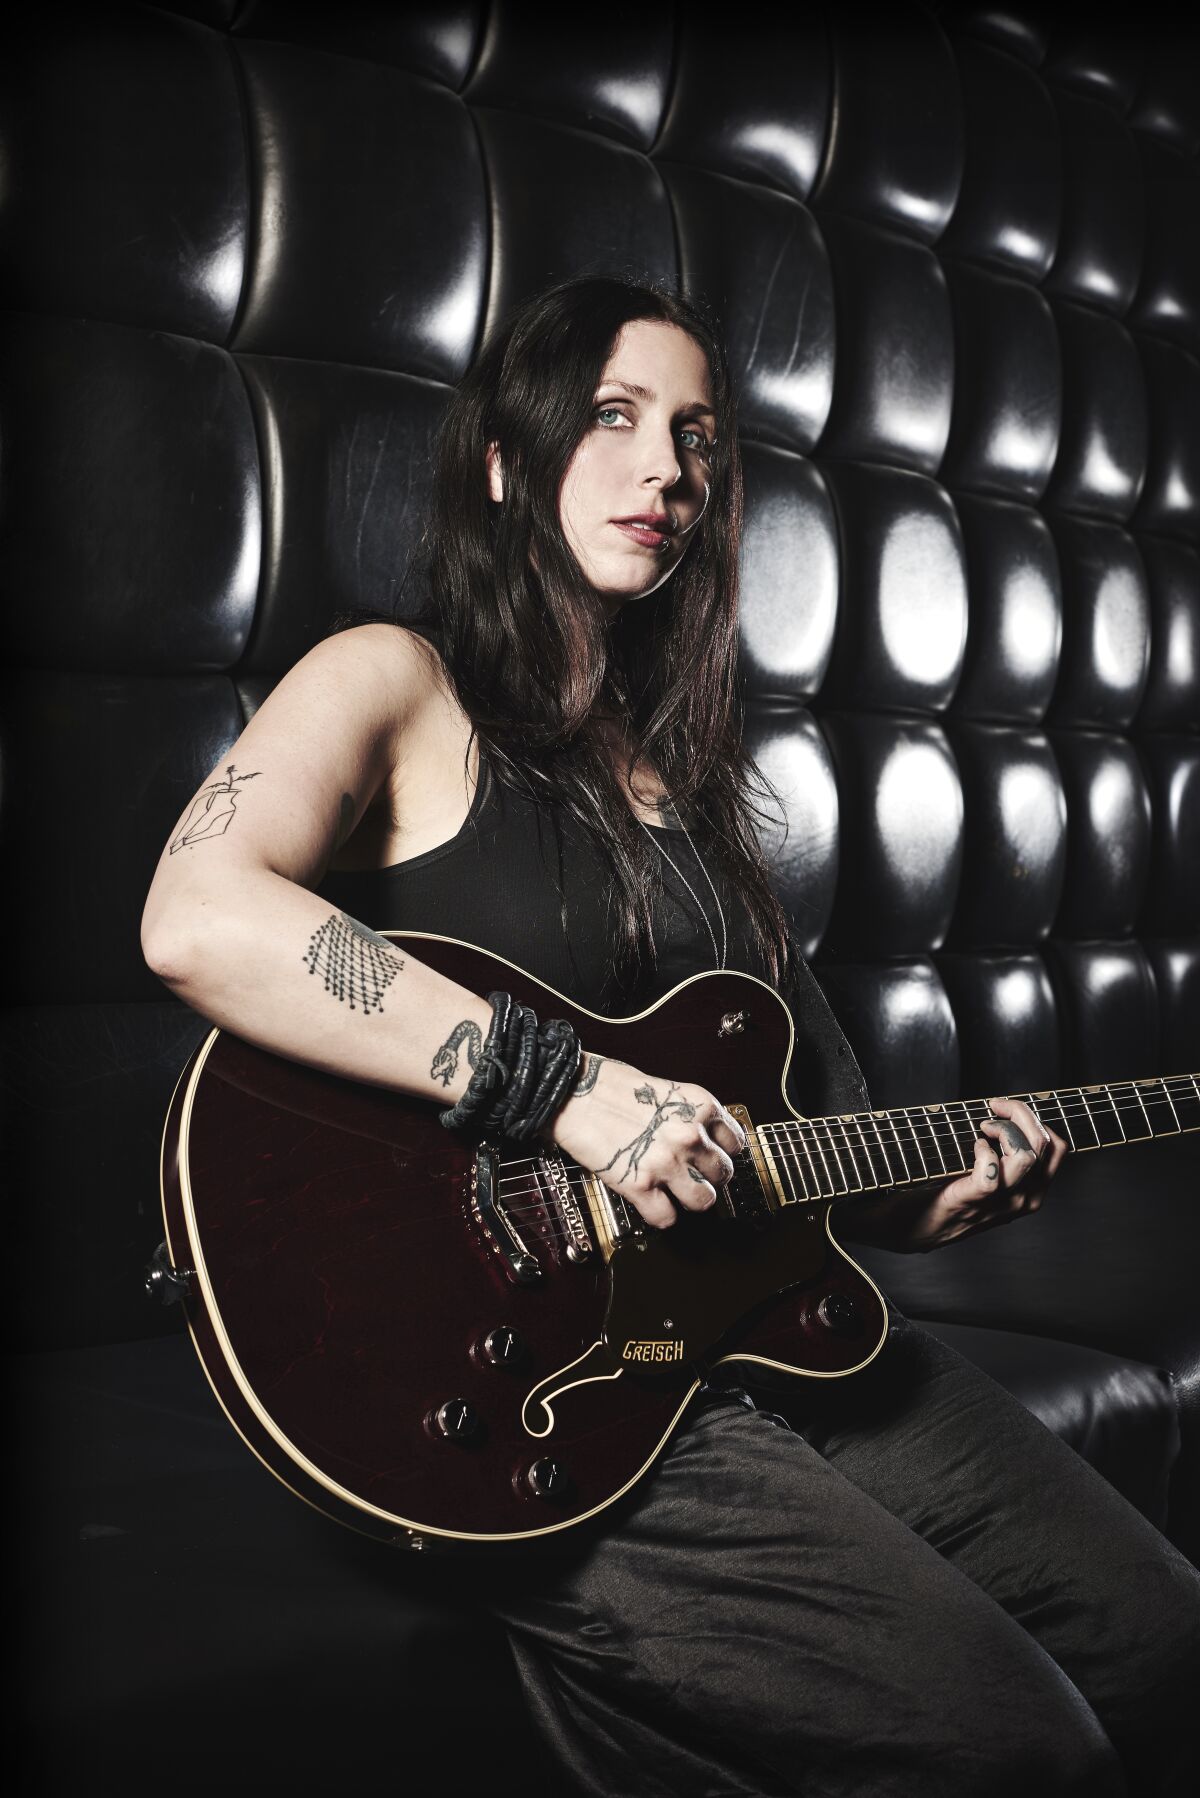 A female musician with tattoos holds a electric guitar.